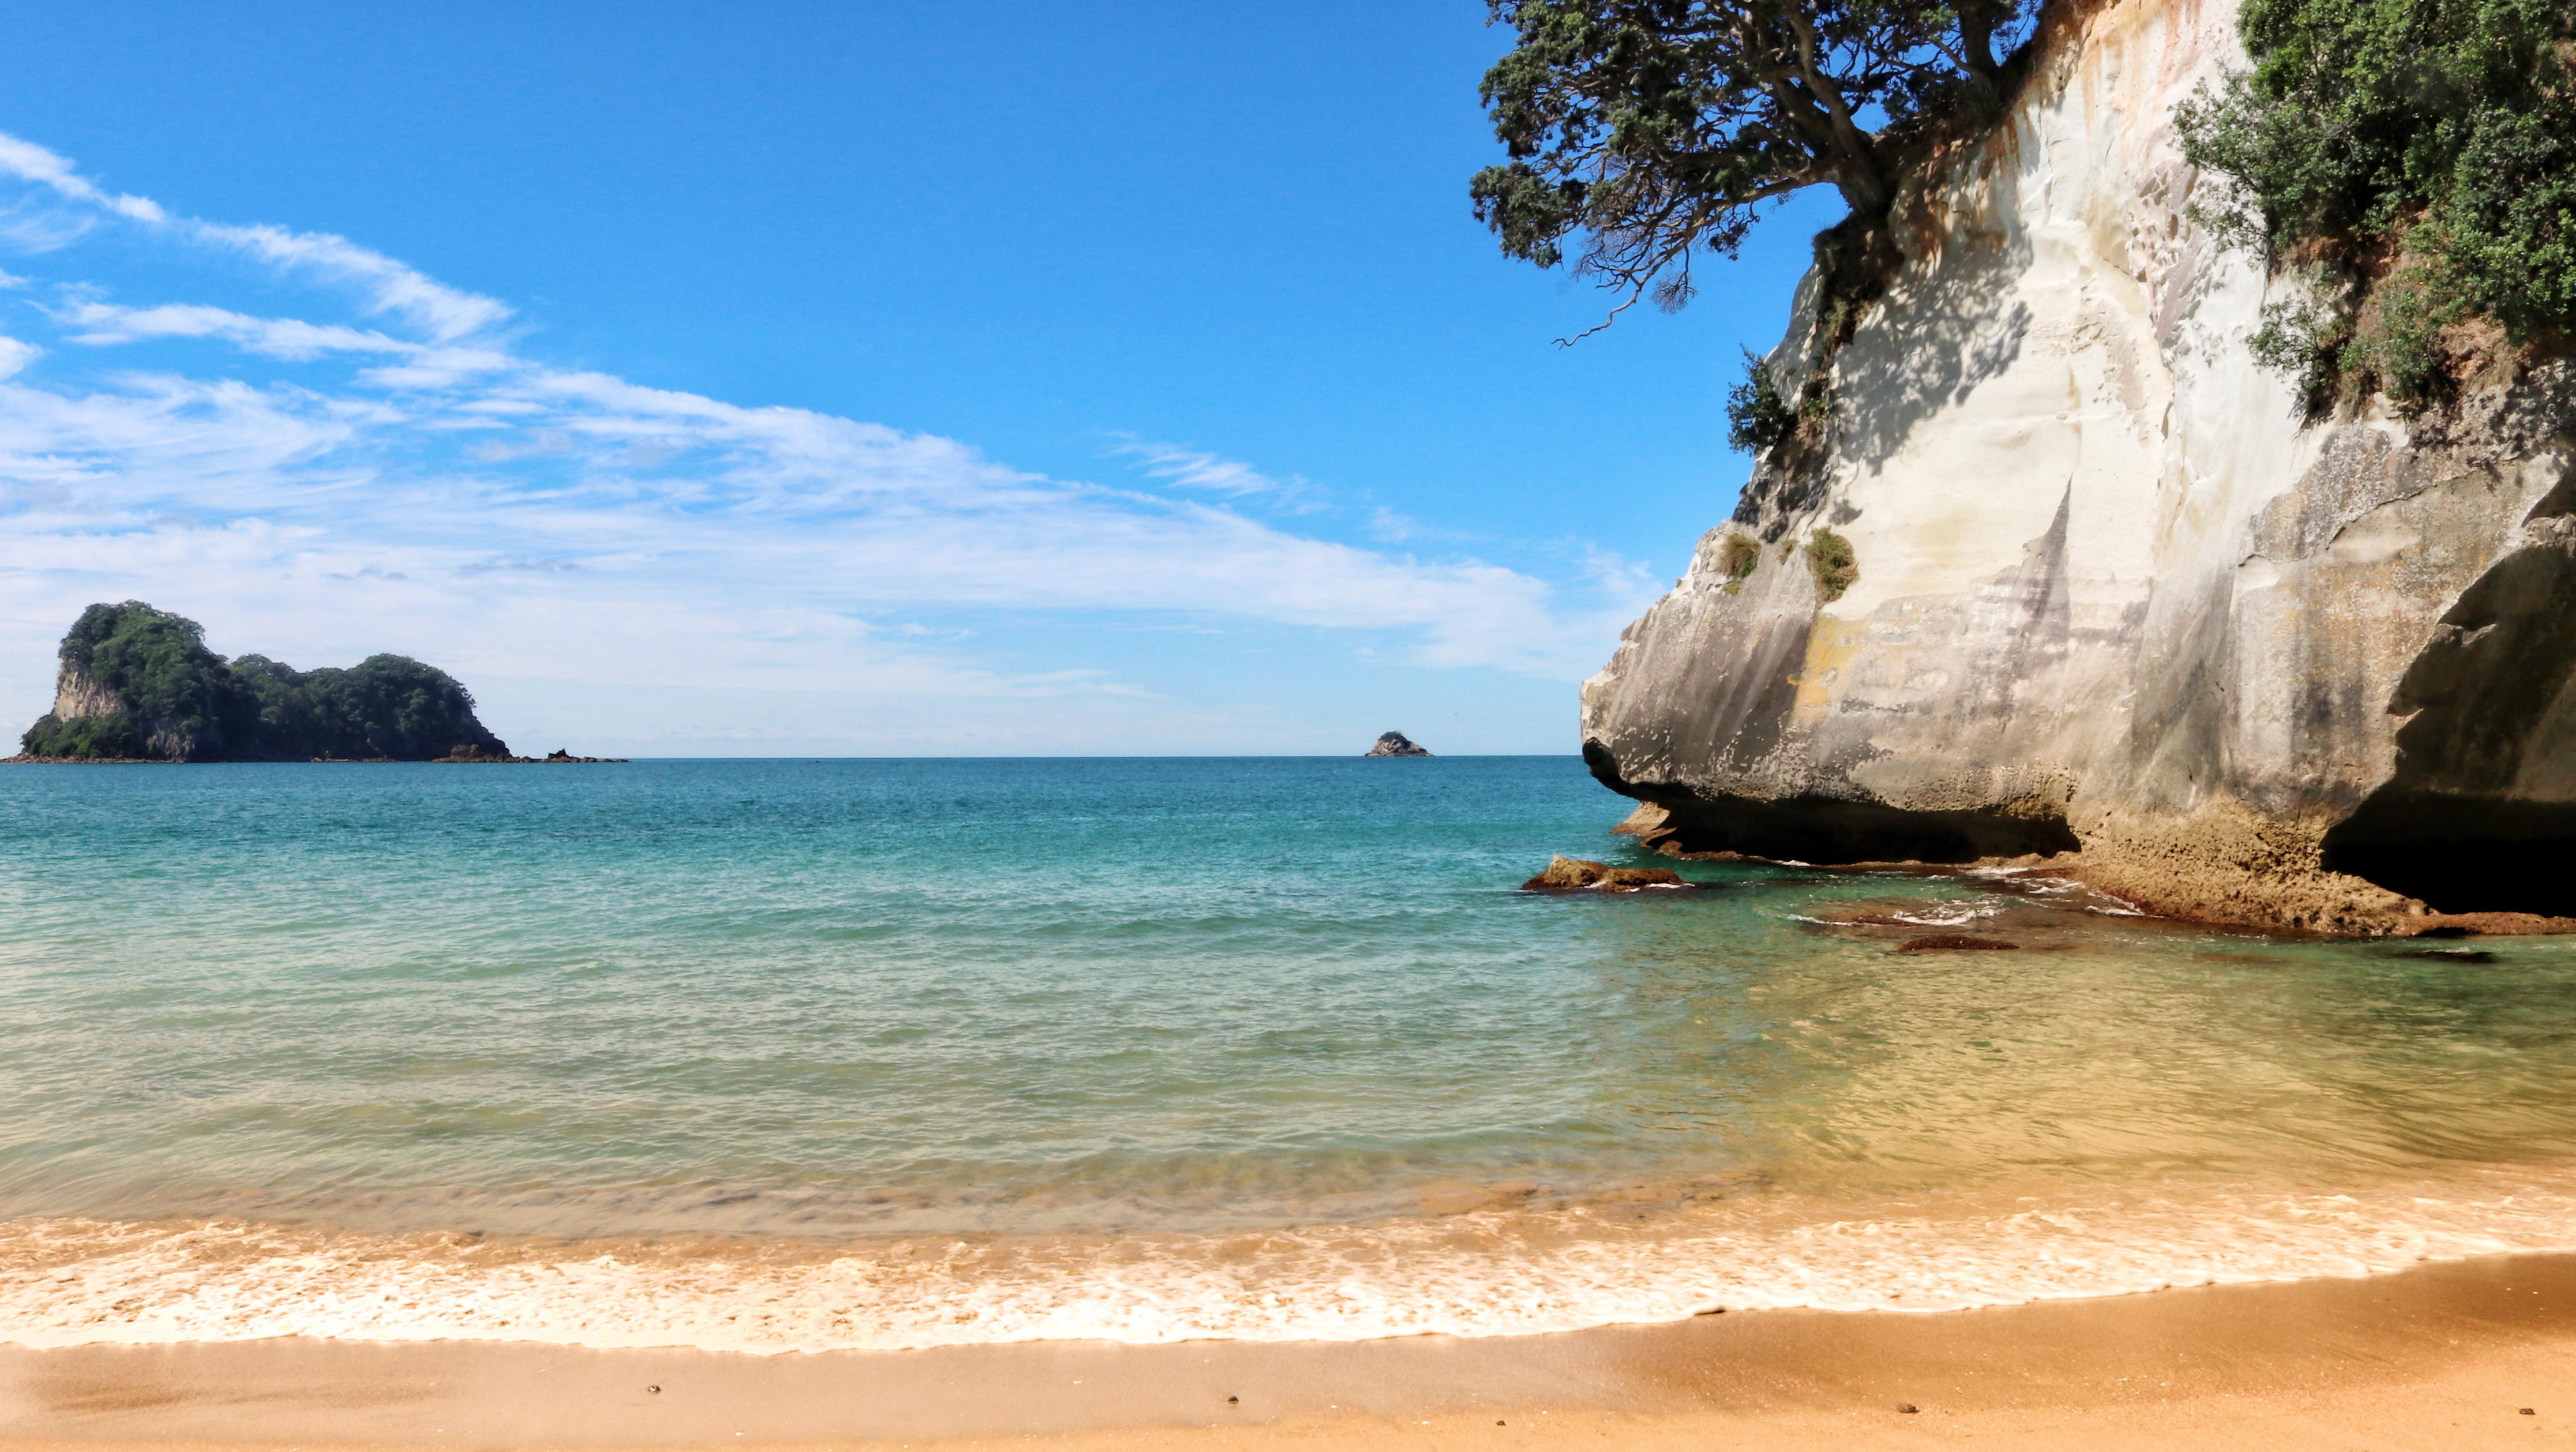 CATHEDRAL COVE, NEW ZEALAND